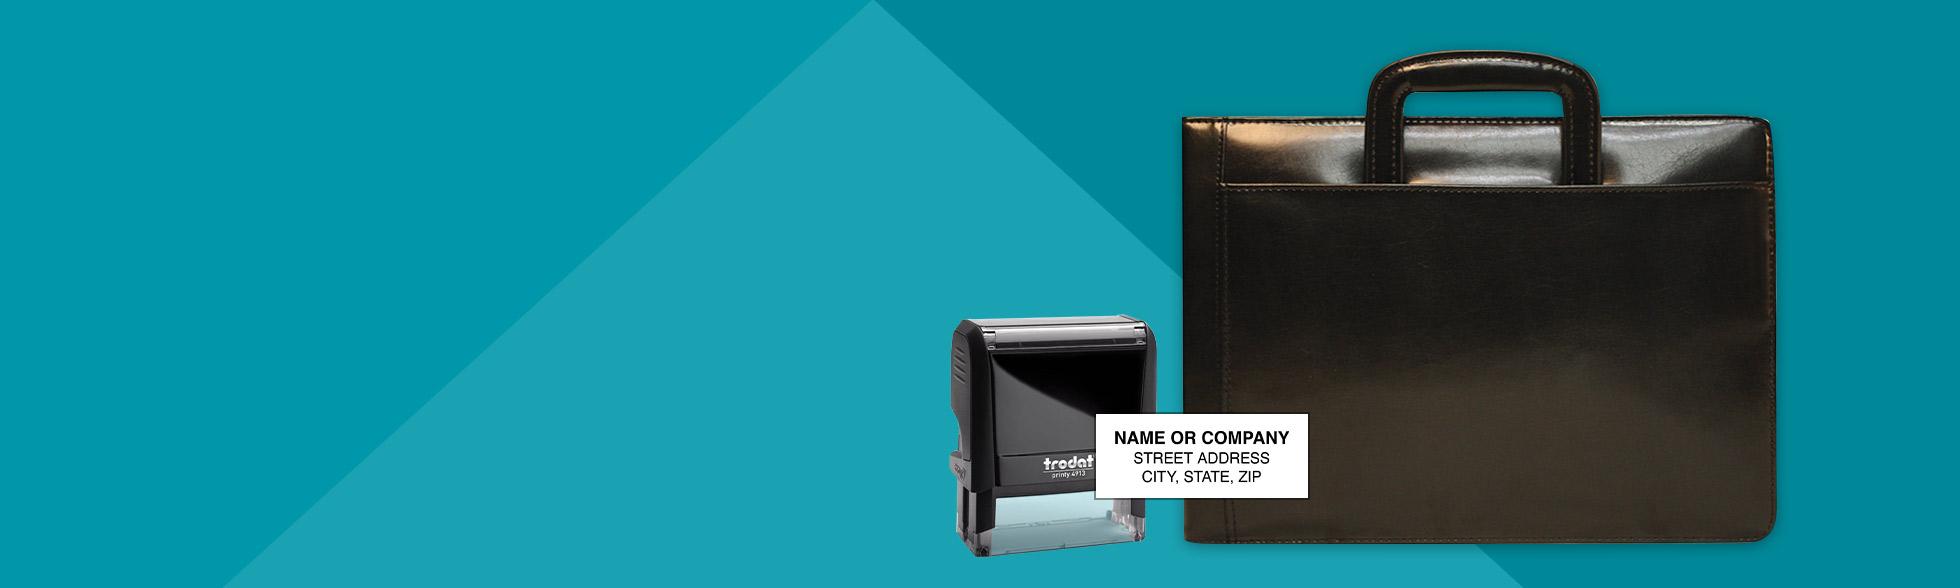 Get more done in less time with our business supplies.